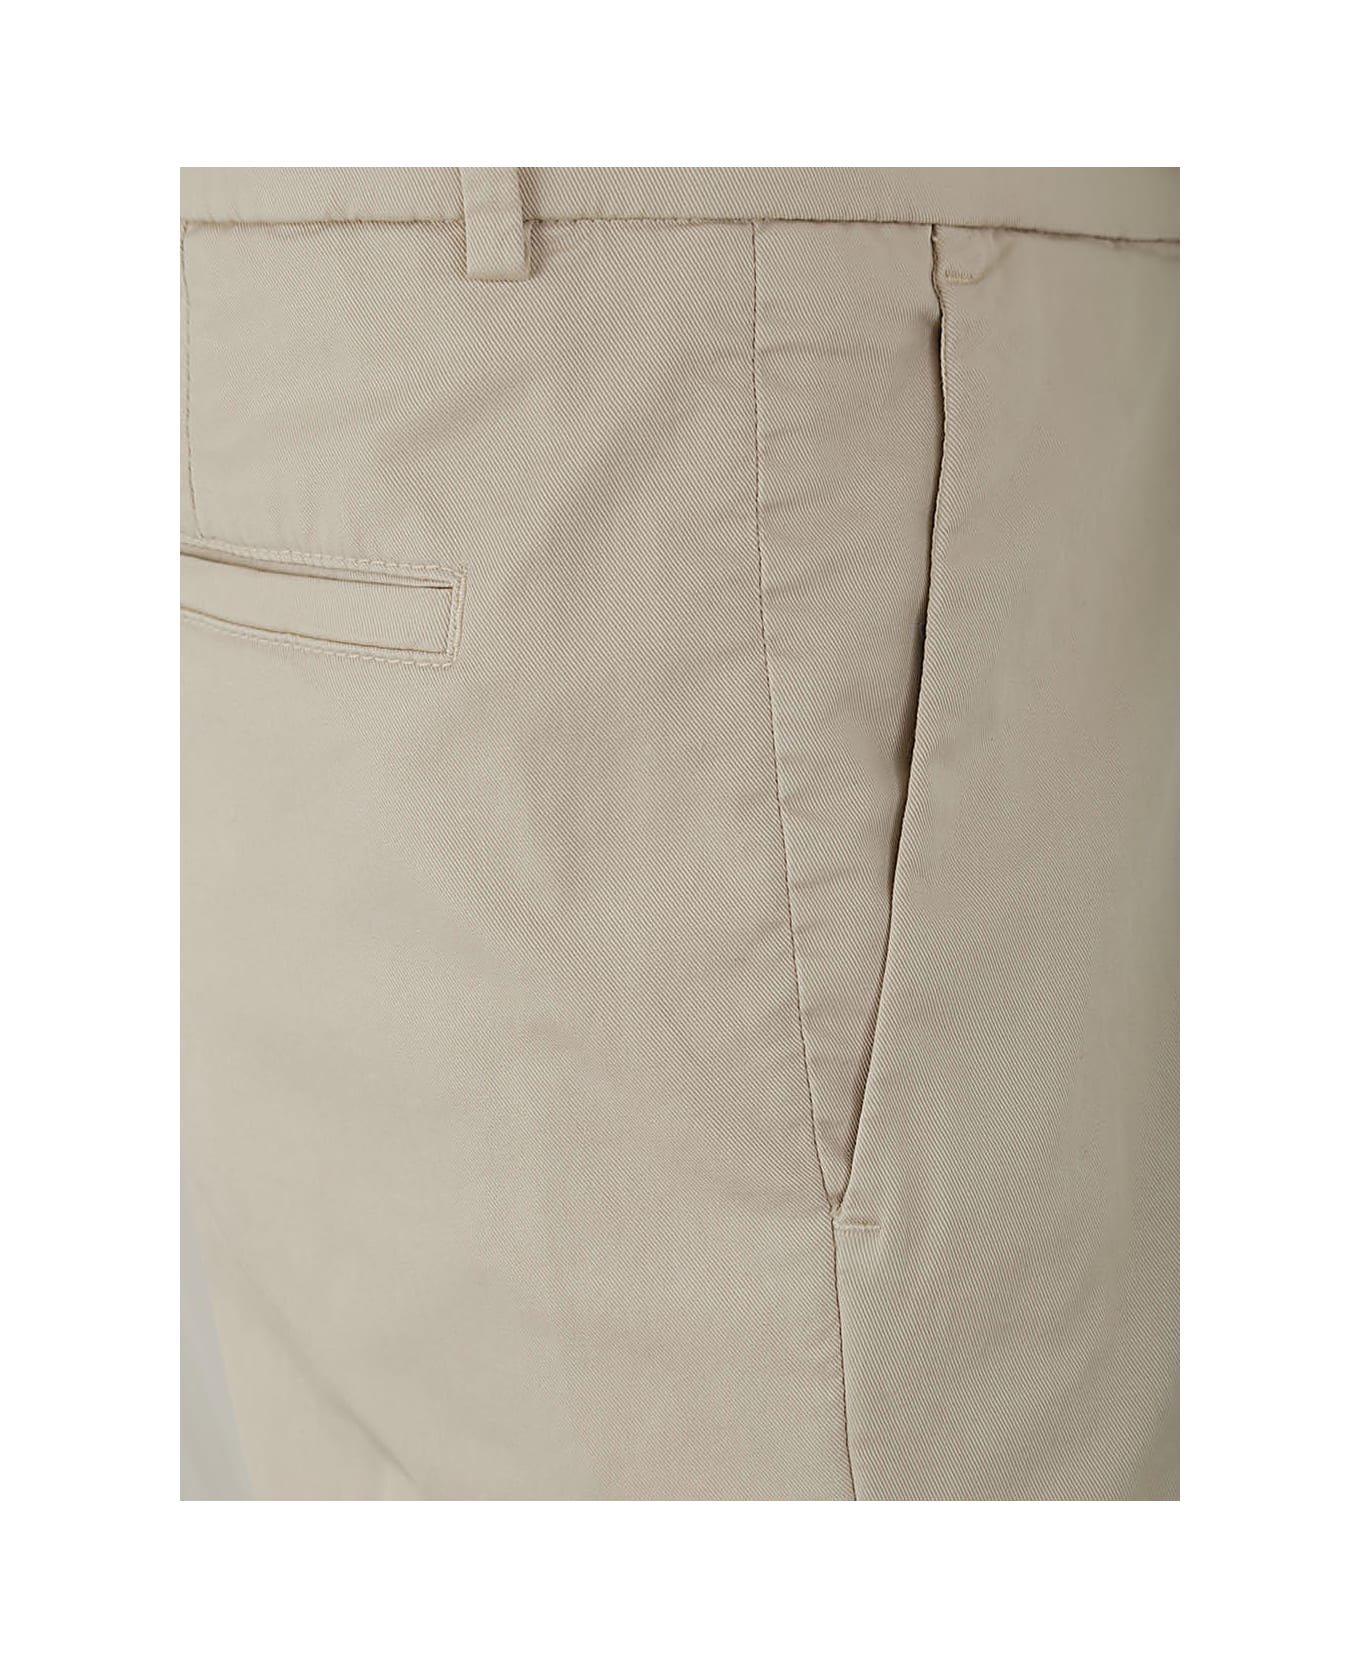 Brunello Cucinelli Dyed Pants - Linen Seed ボトムス